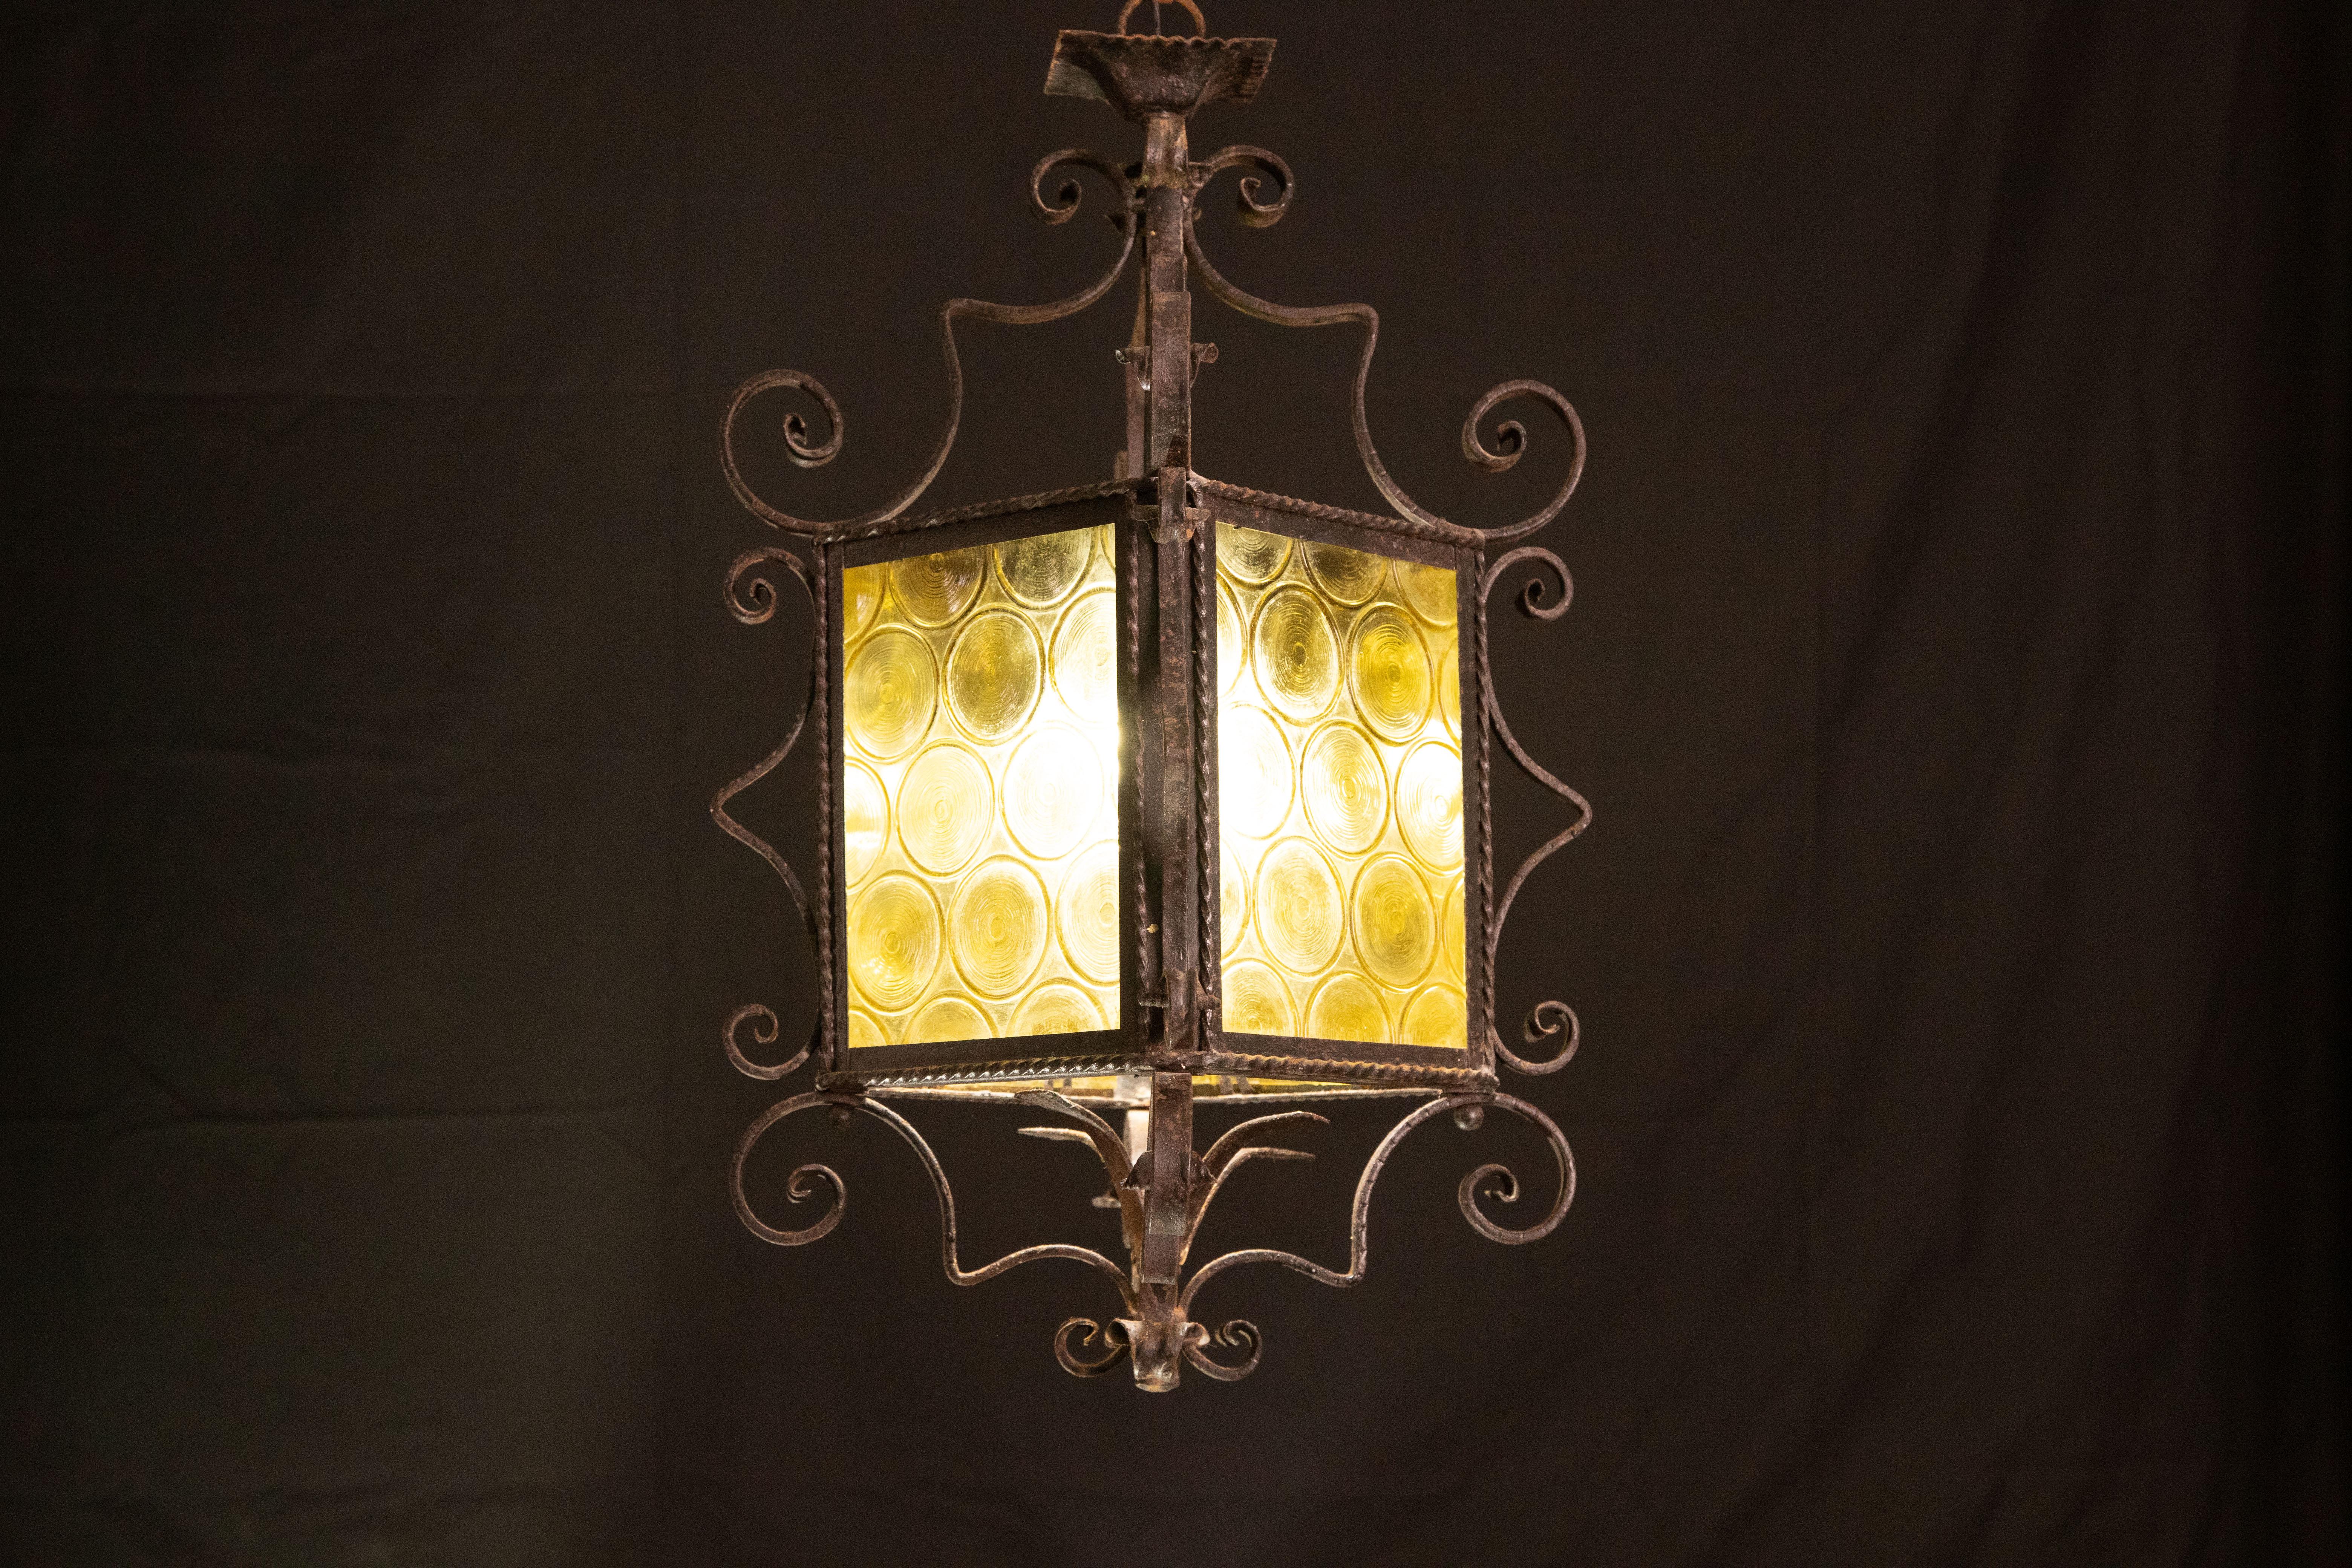 Splendid Italian lantern made around the 1960s.
Measurements: 95 cm in height and 38 in diameter.
Mount a European standard e27 light.
There are signs of aging on the structure that give it a history and a certain beauty.
Perfect for decorating an